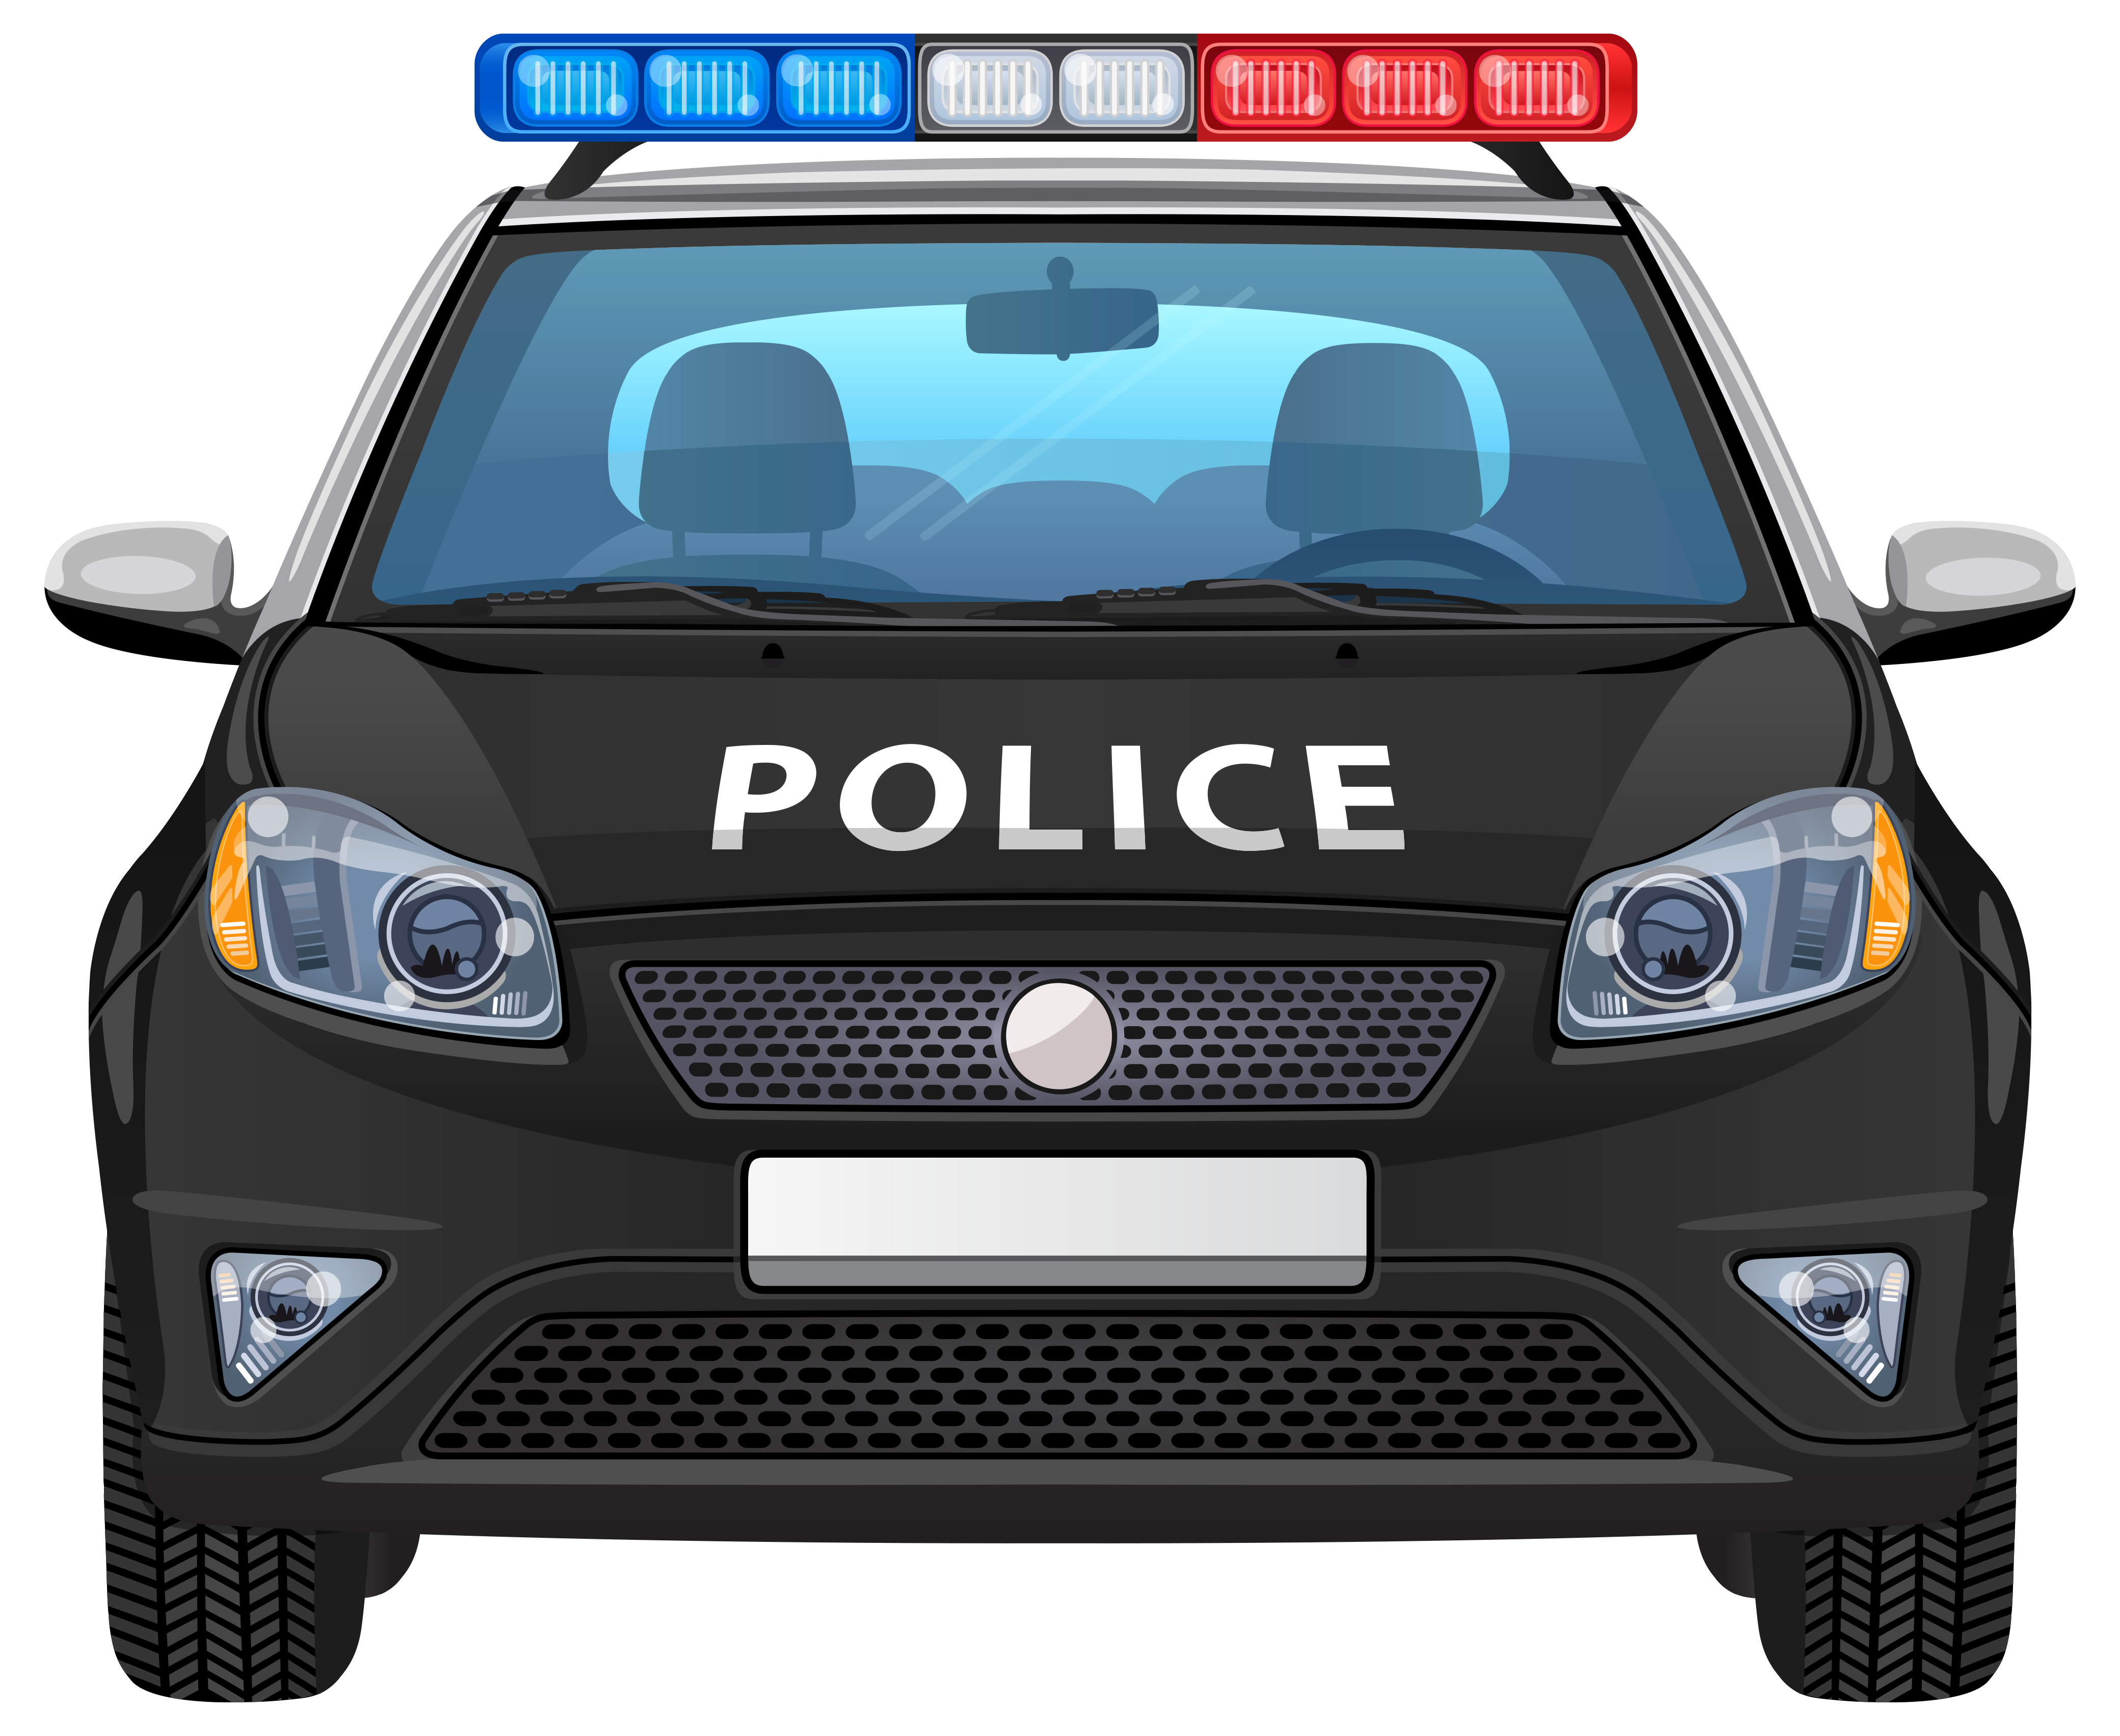 . Hdpng.com Best Police Car Clip Art Image File Free Hdpng.com  - Police, Transparent background PNG HD thumbnail